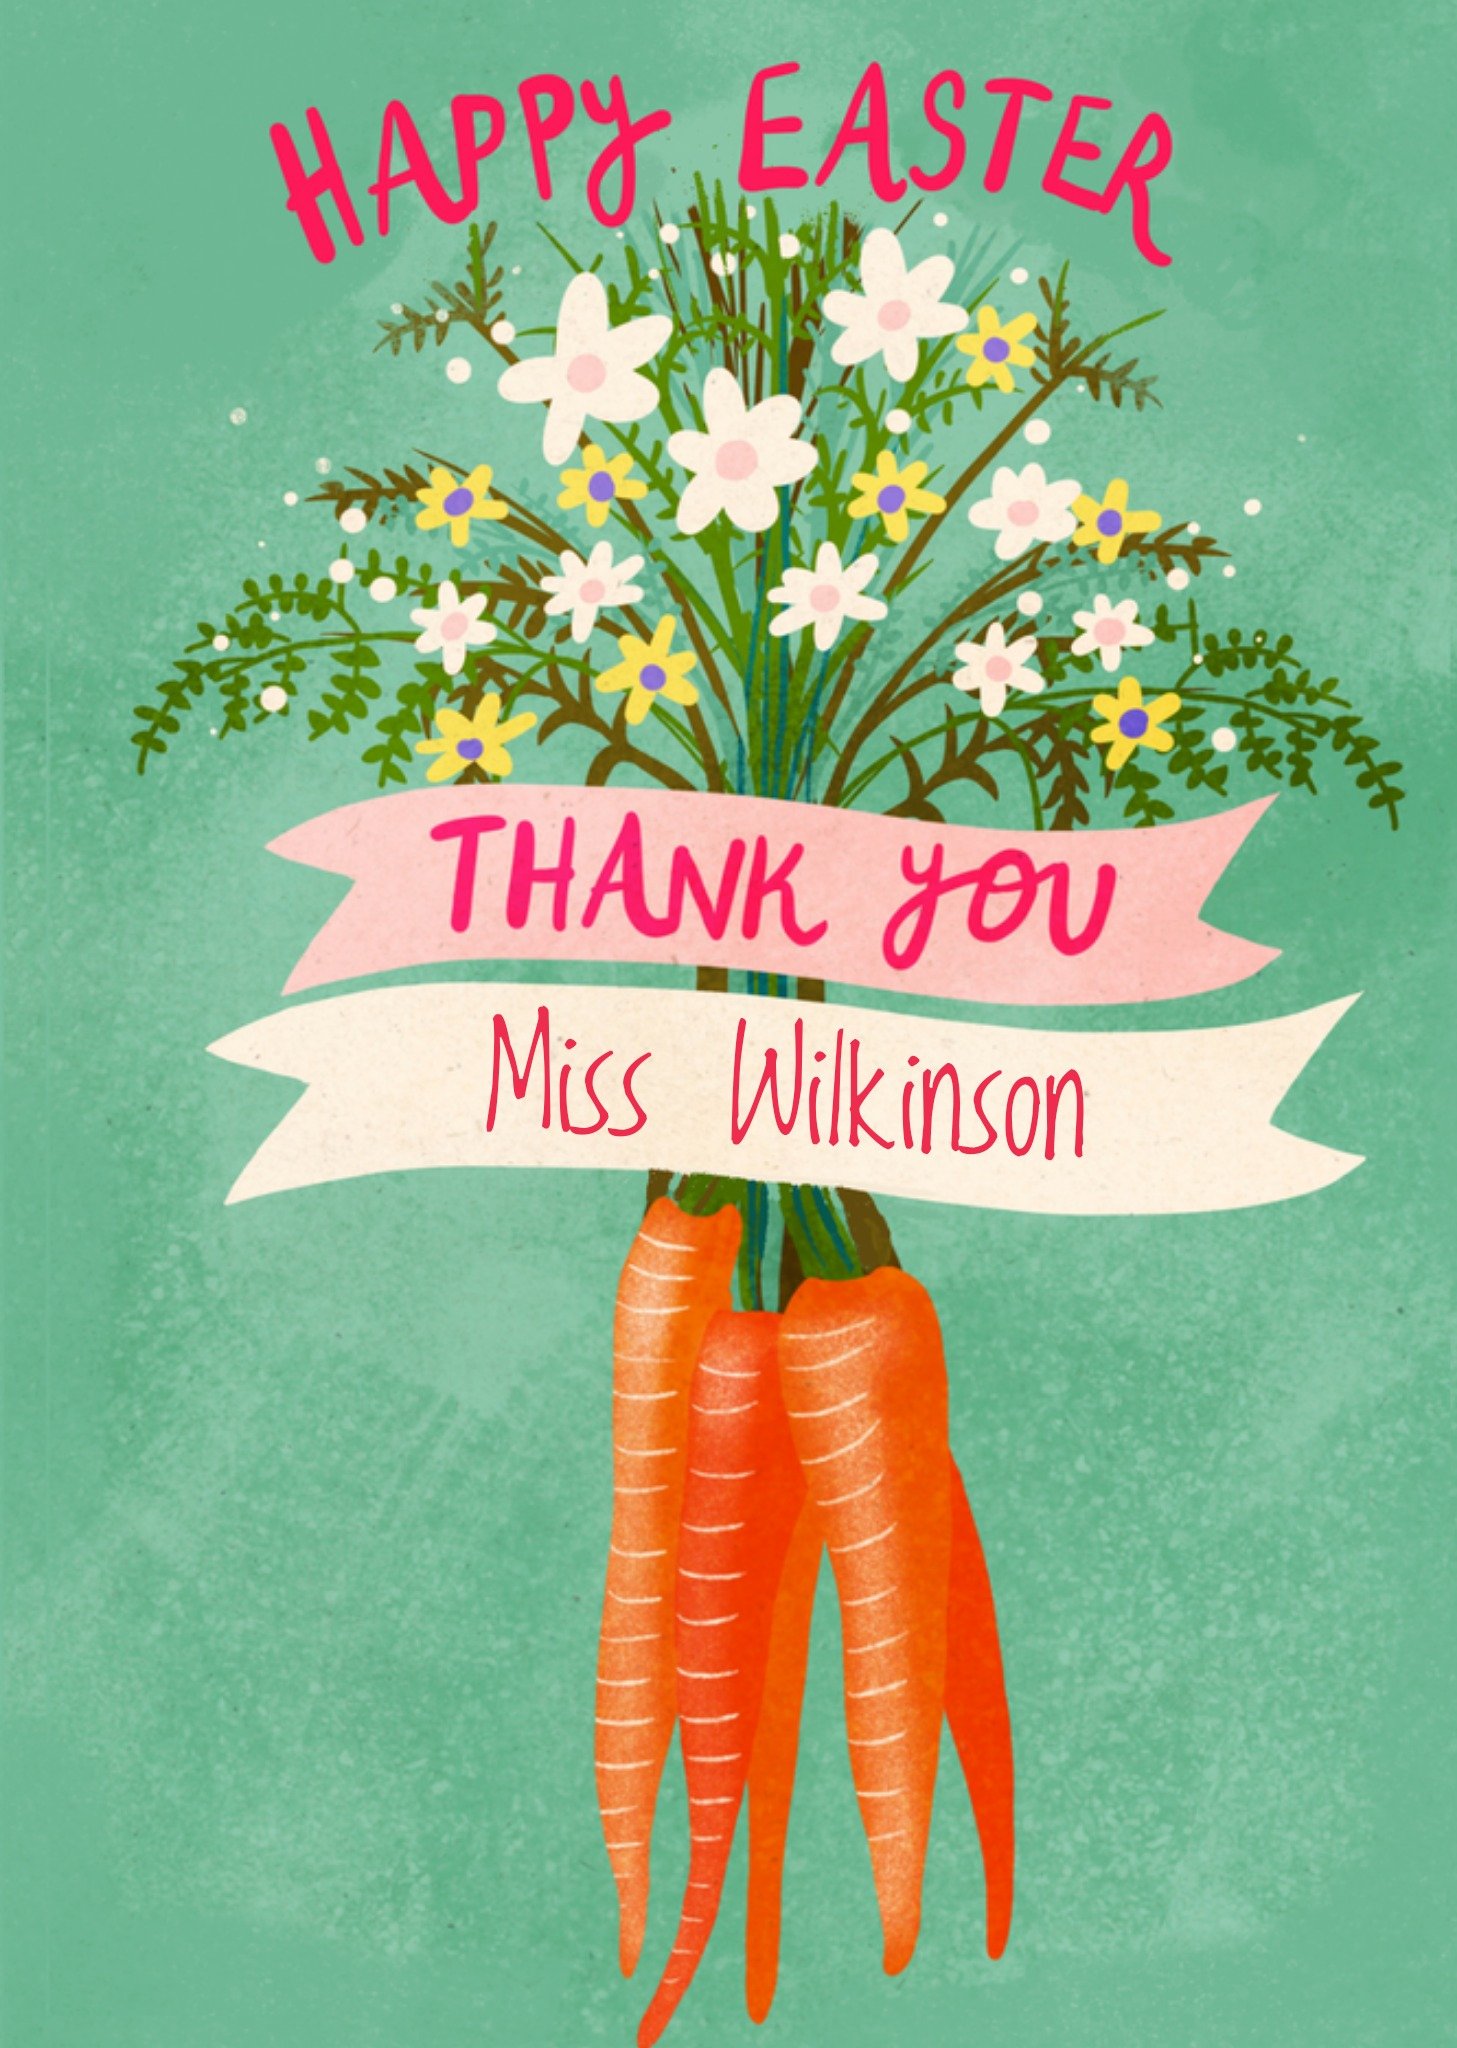 Moonpig Cake And Crayons Illustrated Carrot Flowers Easter Thank You Card, Large